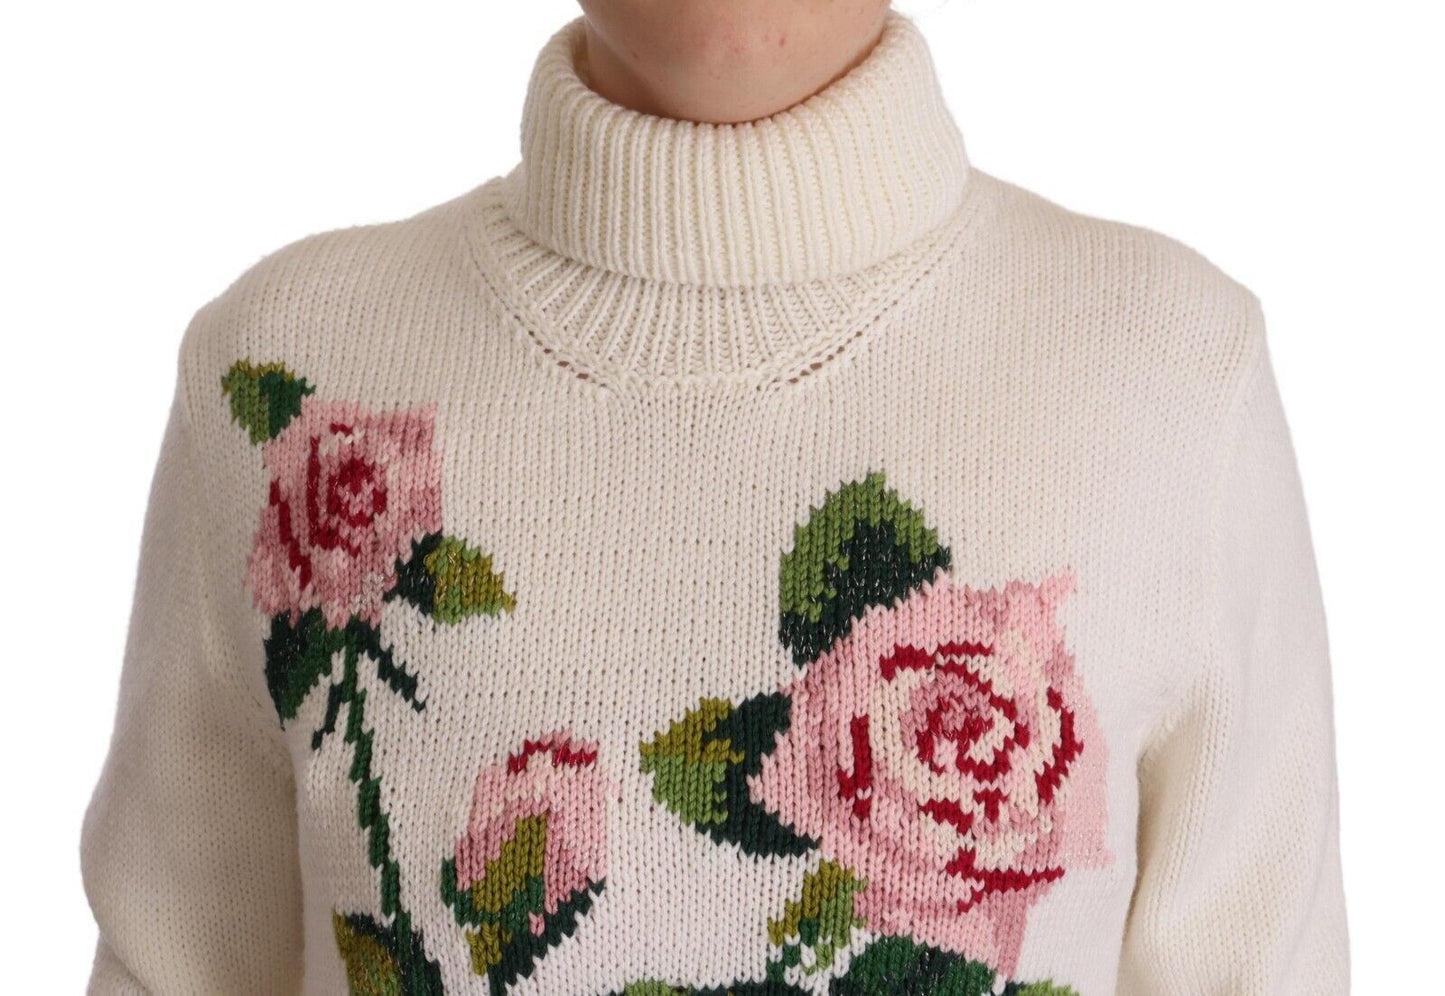 White Floral Knitted Turtle Neck Pullover Sweater